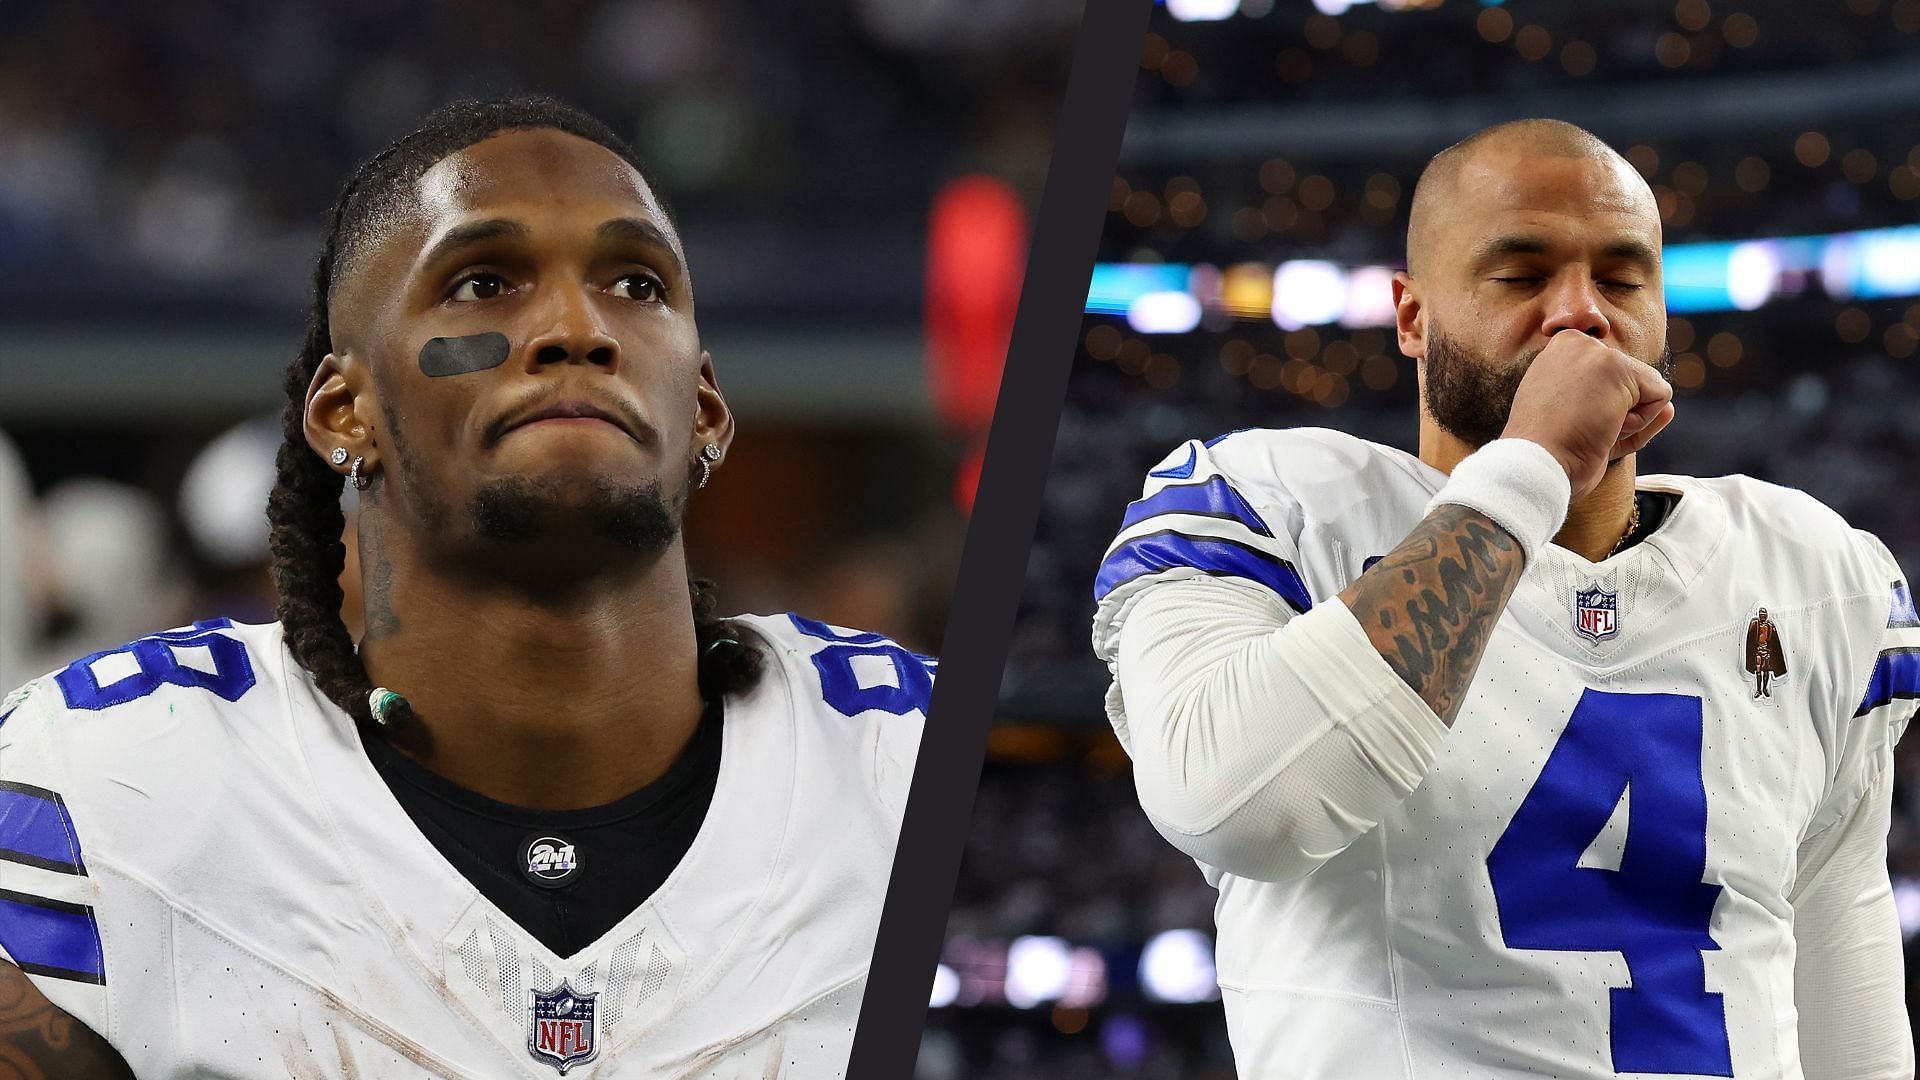 Cowboys WR CeeDee Lamb&rsquo;s mom unleashes furious rant against Dak Prescott: &ldquo;They need to get rid of his a*s!&rdquo;